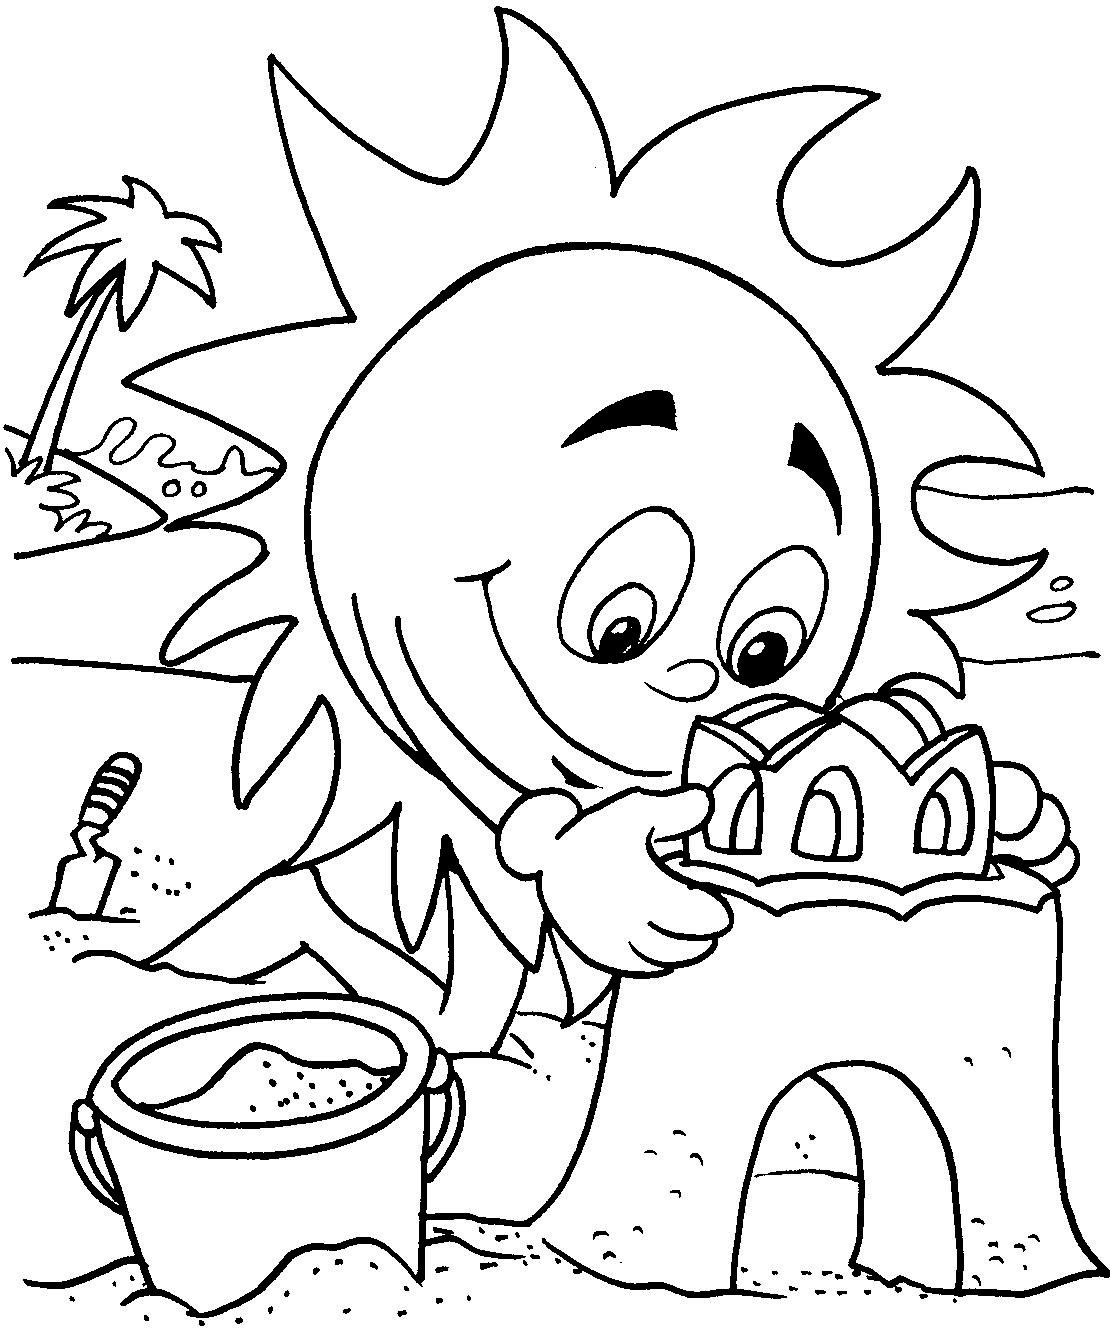 Summer Coloring Pages For Kids
 Summer Coloring Pages 5